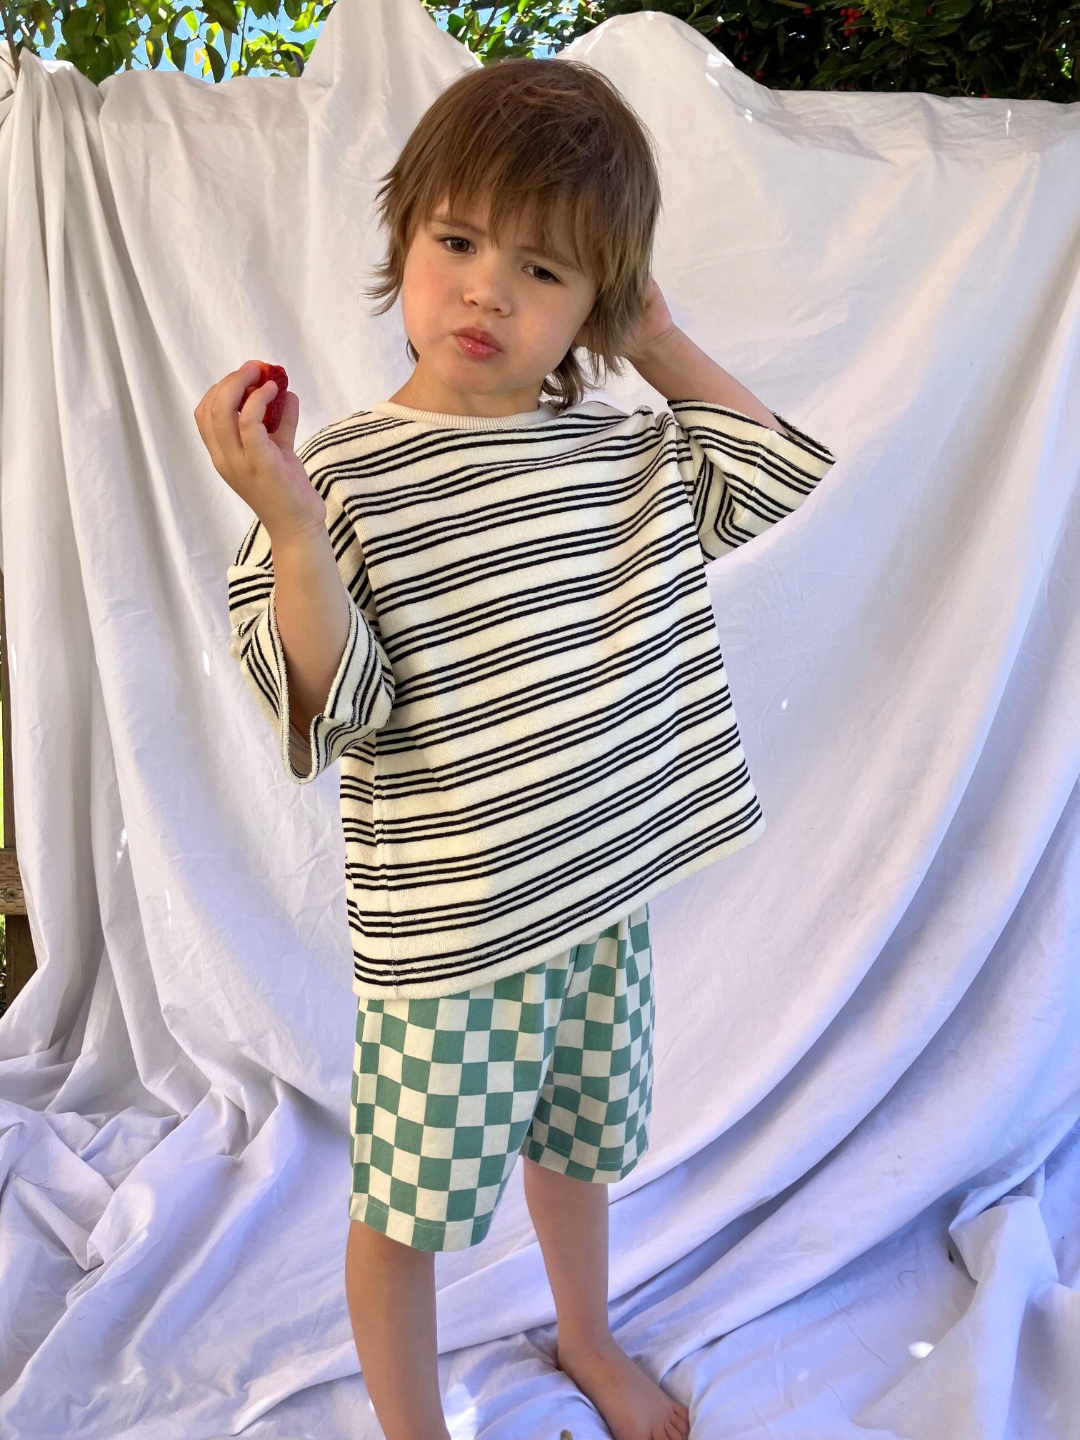 A child wearing the kids Frankie Short in Teal & Ivory check, paired with a boxy cream tshirt with fine black stripes. He is eating a strawberry and standing on a white cloth backdrop, with trees in the background.